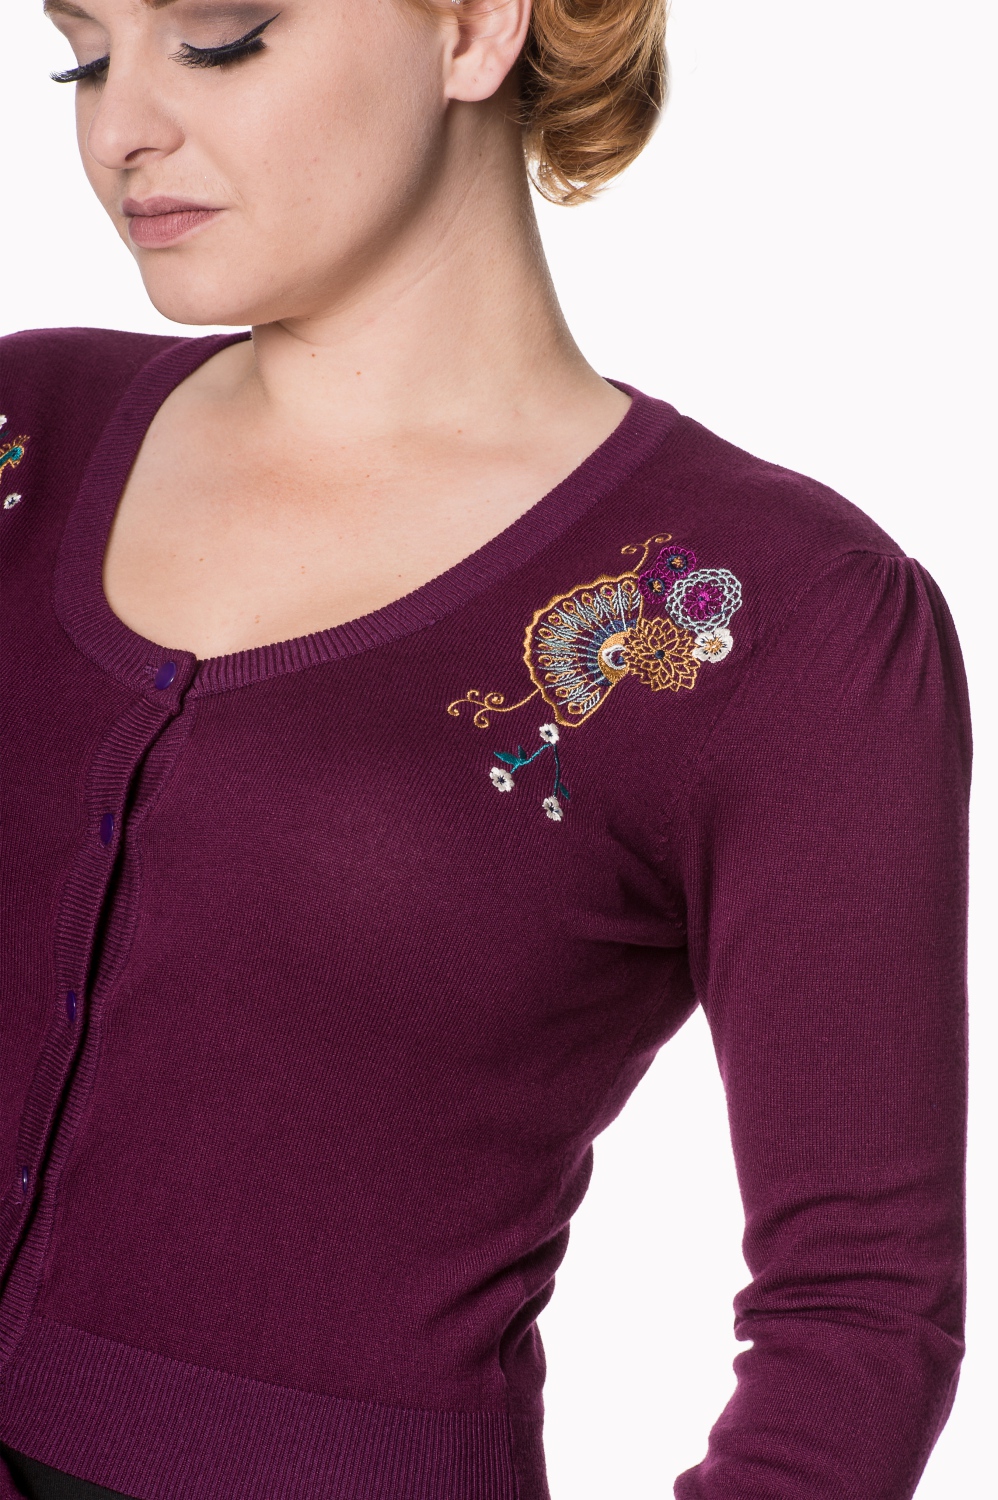 Aubergine Stand Out From The Crowd Peacock Cardigan